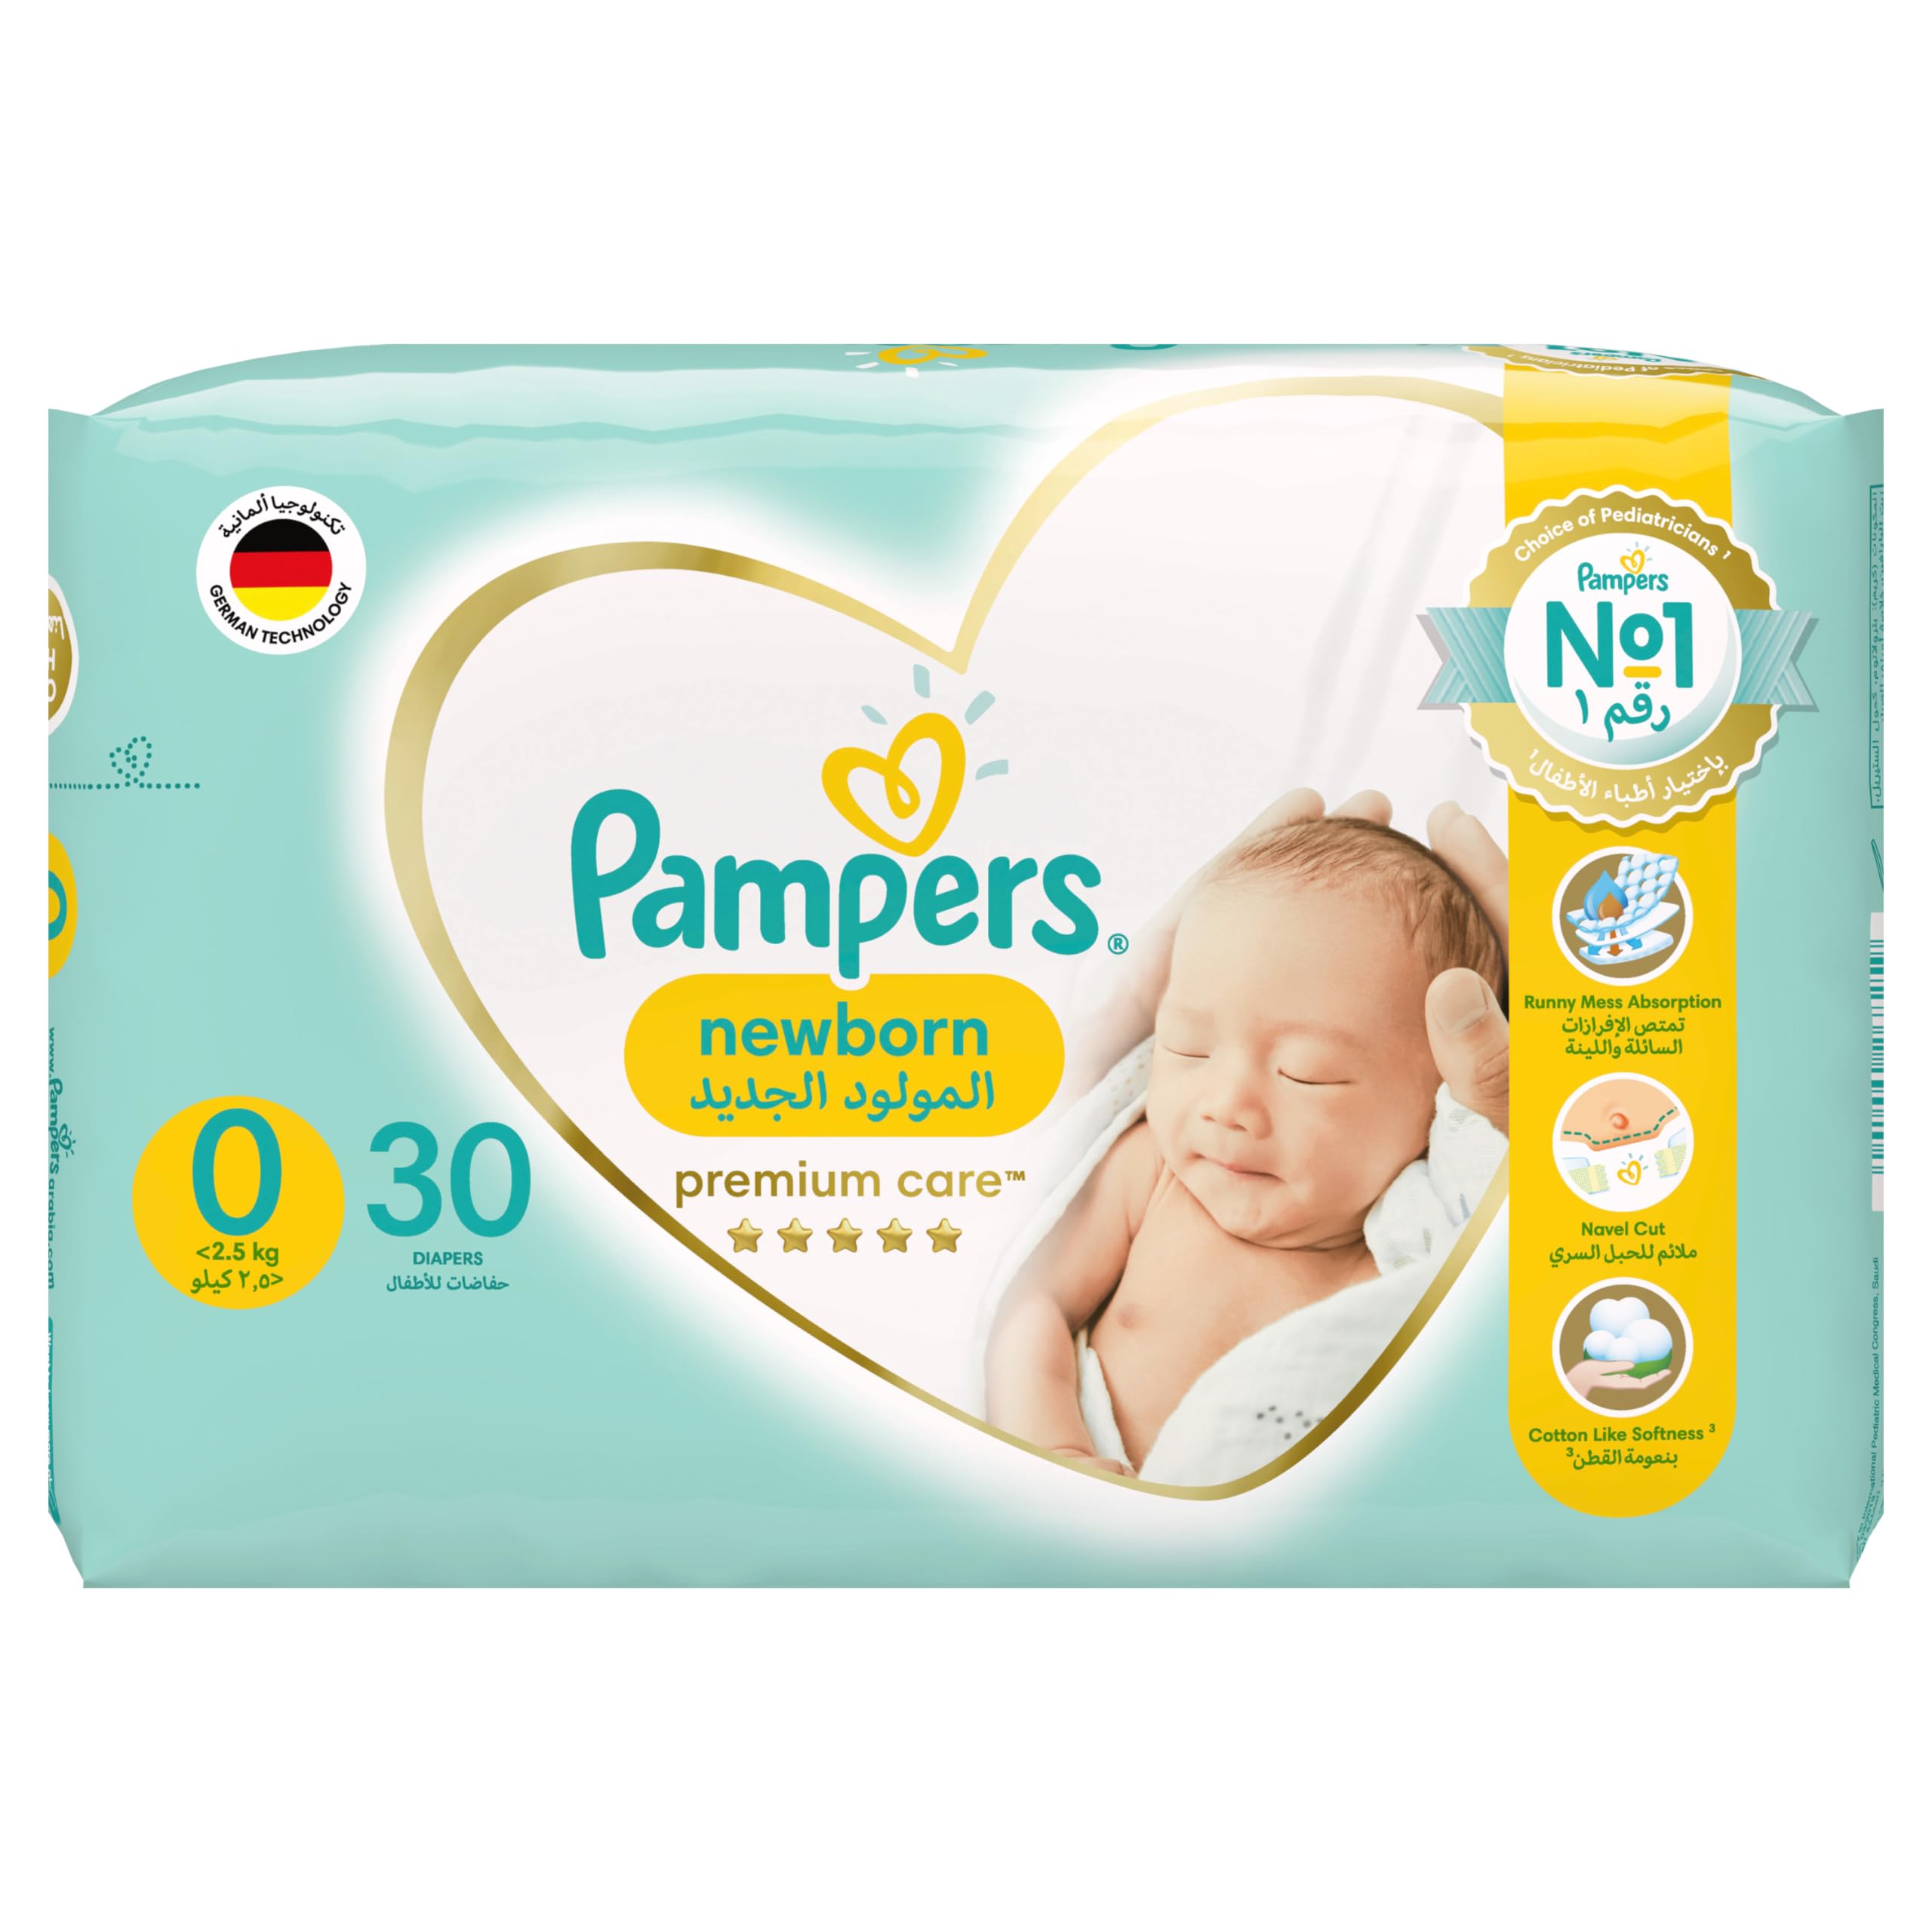 Pampers Premium Care Newborn Taped Diapers, Size 0, < 2.5kg, Unique Softest Absorption for Ultimate Skin Protection, 30 Count